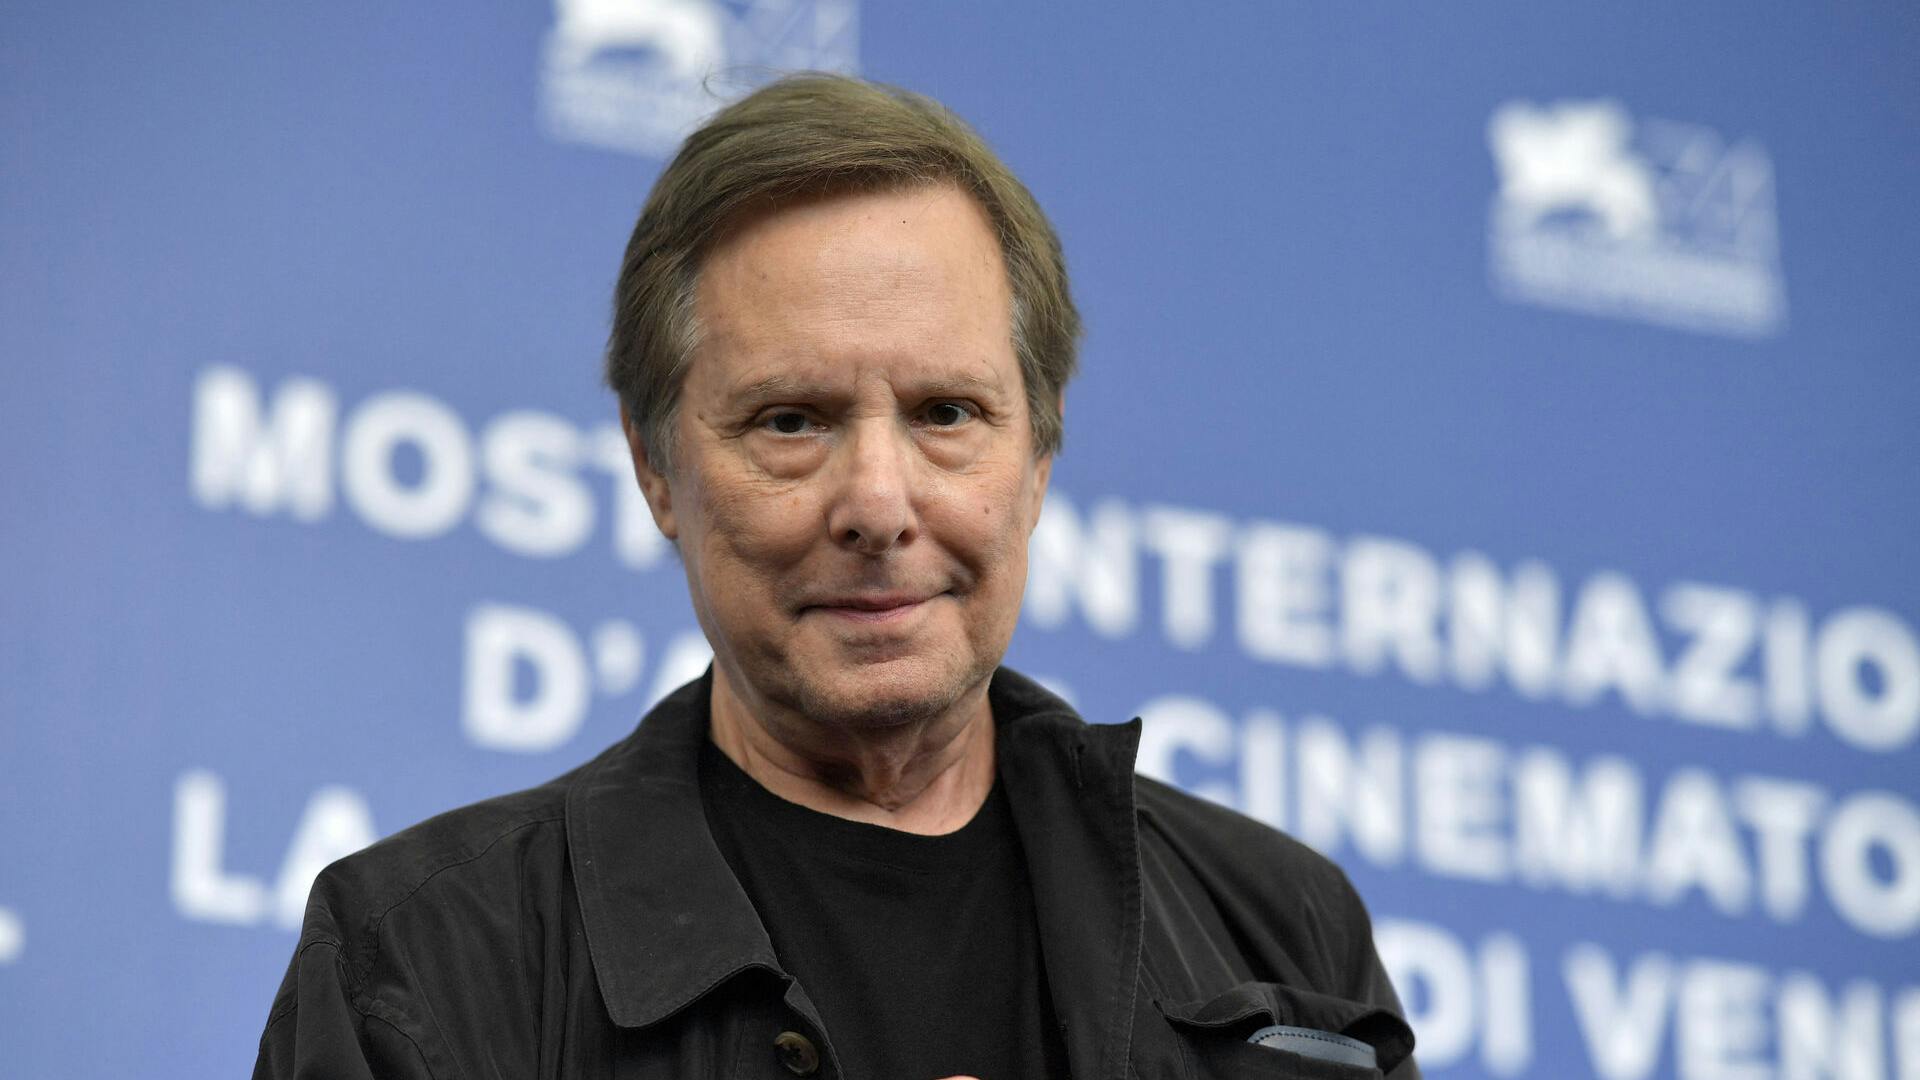 Director William Friedkin attends a photocall of the movie "The Devil and Father Amorth" presented out of competition during the 74th Venice Film Festival on August 31, 2017 at Venice Lido. Tiziana FABI / AFP